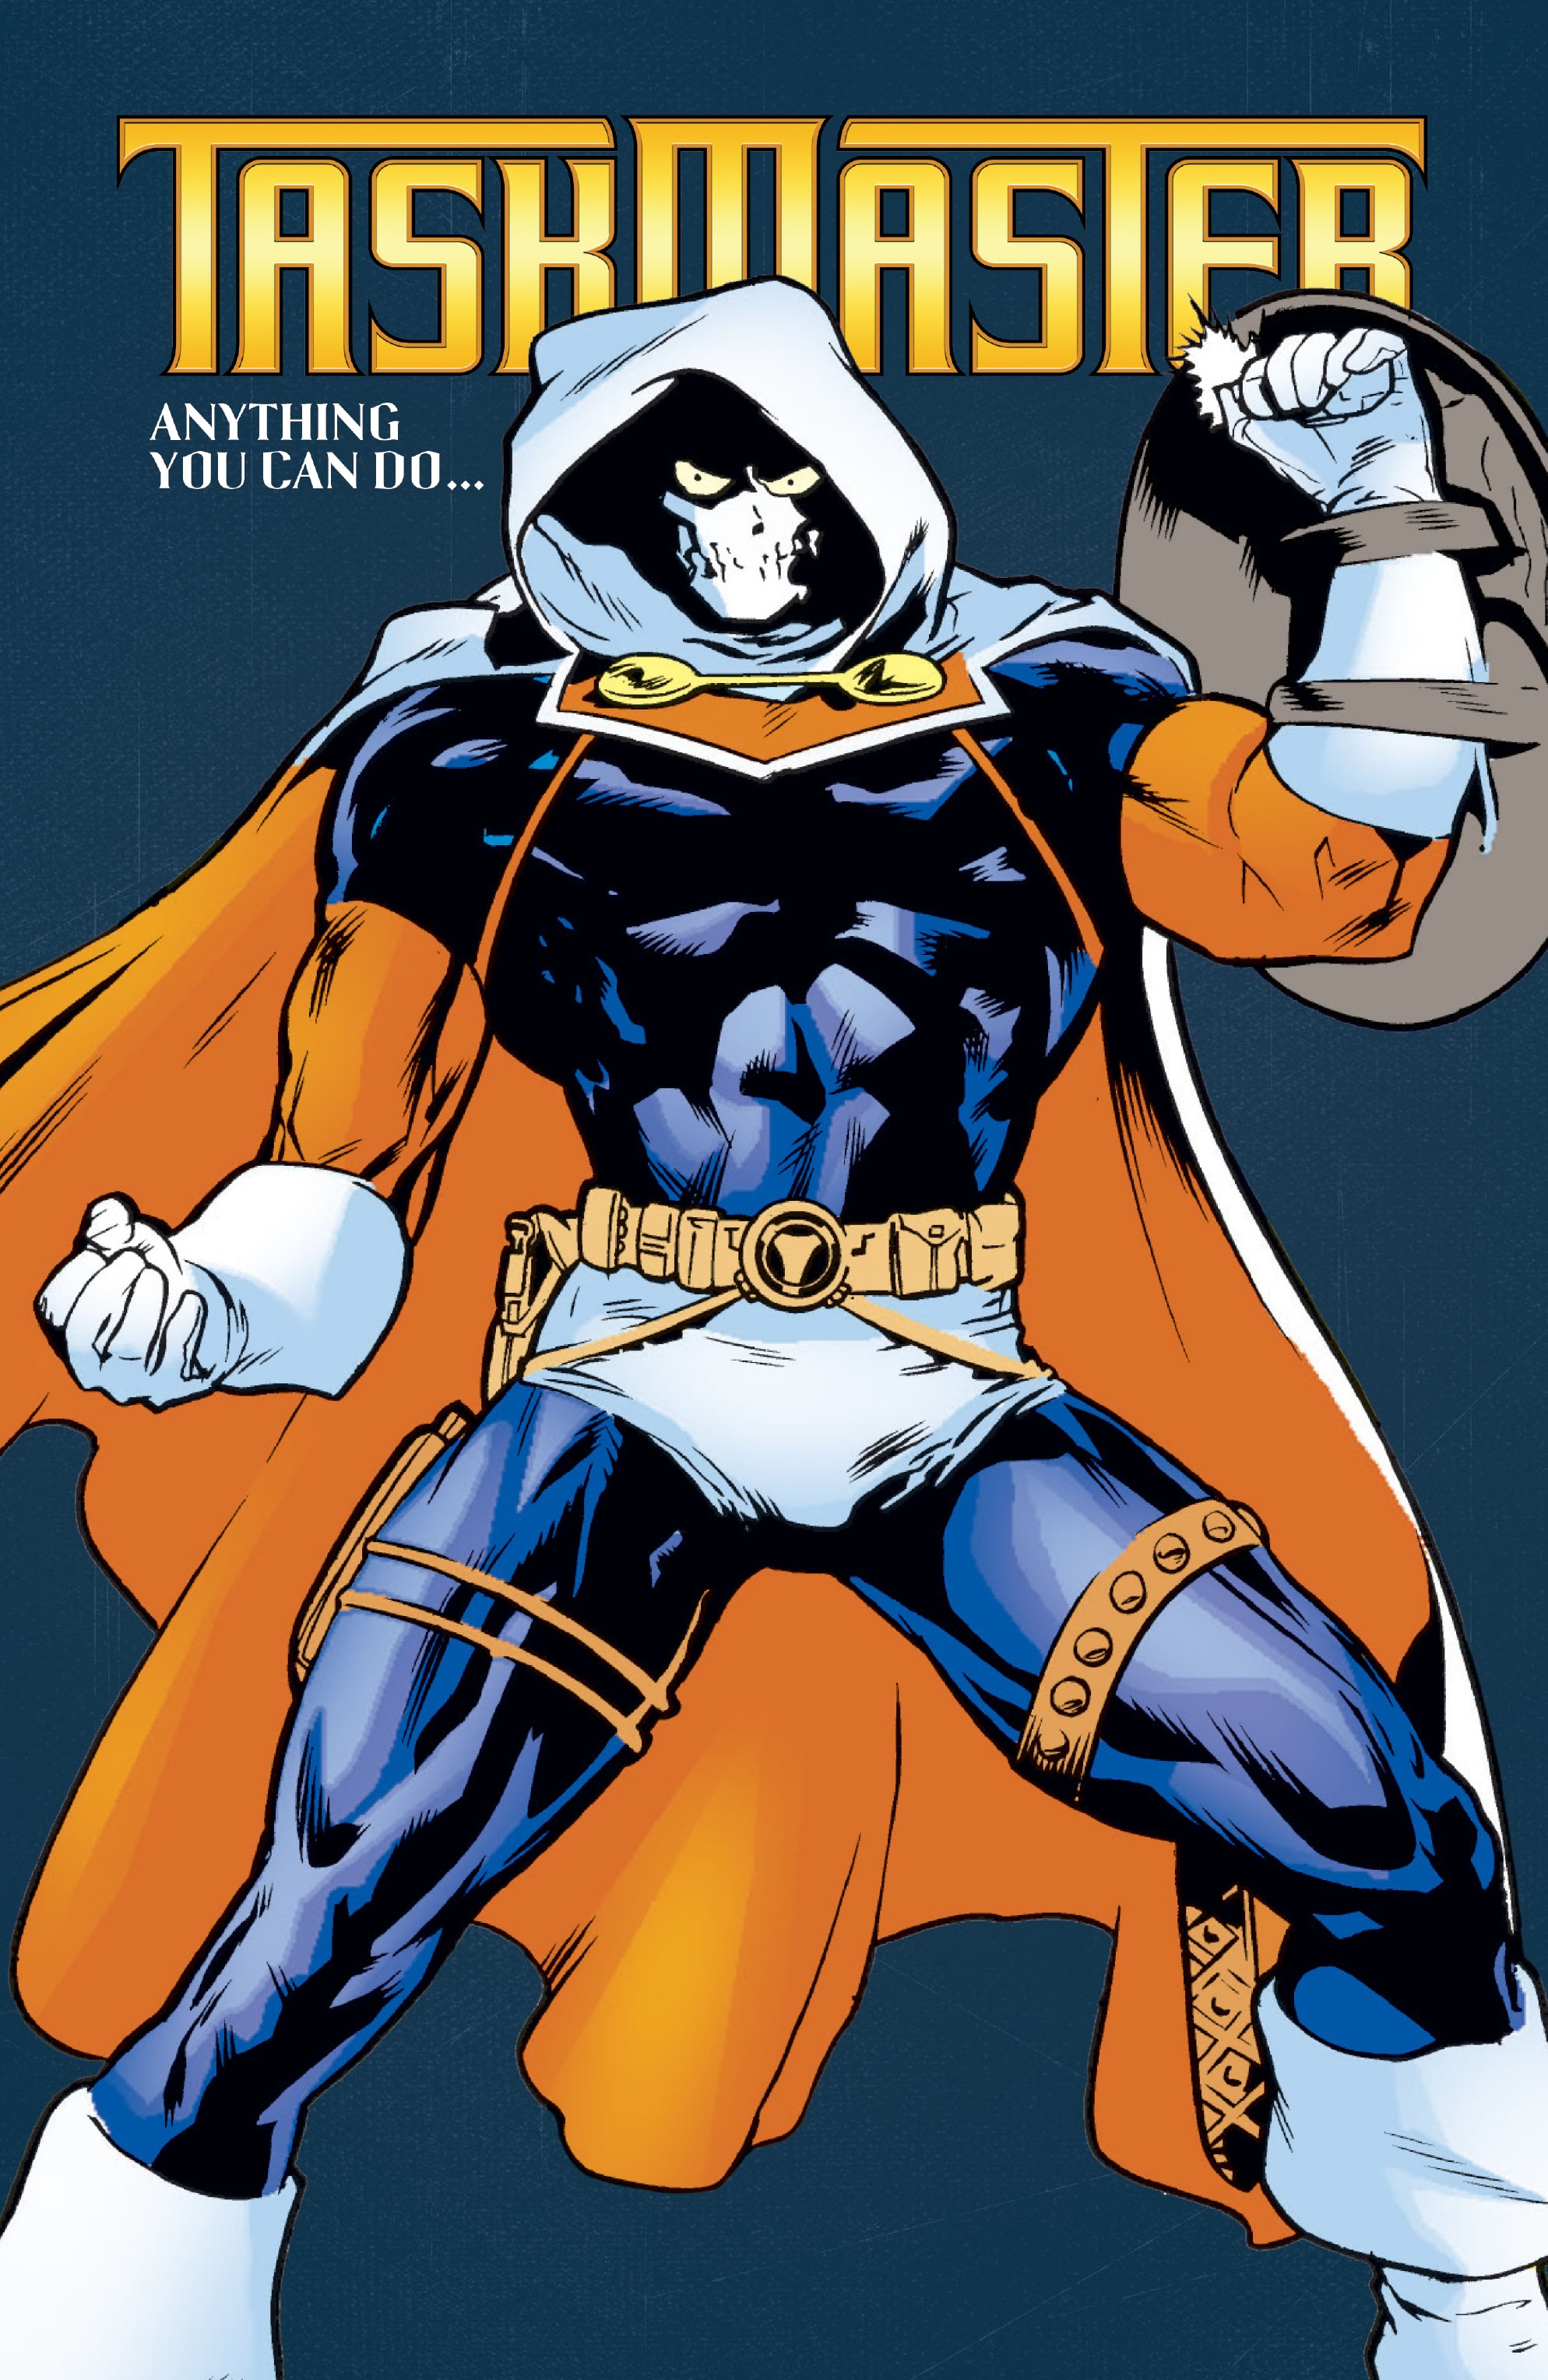 Read online Taskmaster: Anything You Can Do... comic -  Issue # TPB (Part 1) - 2